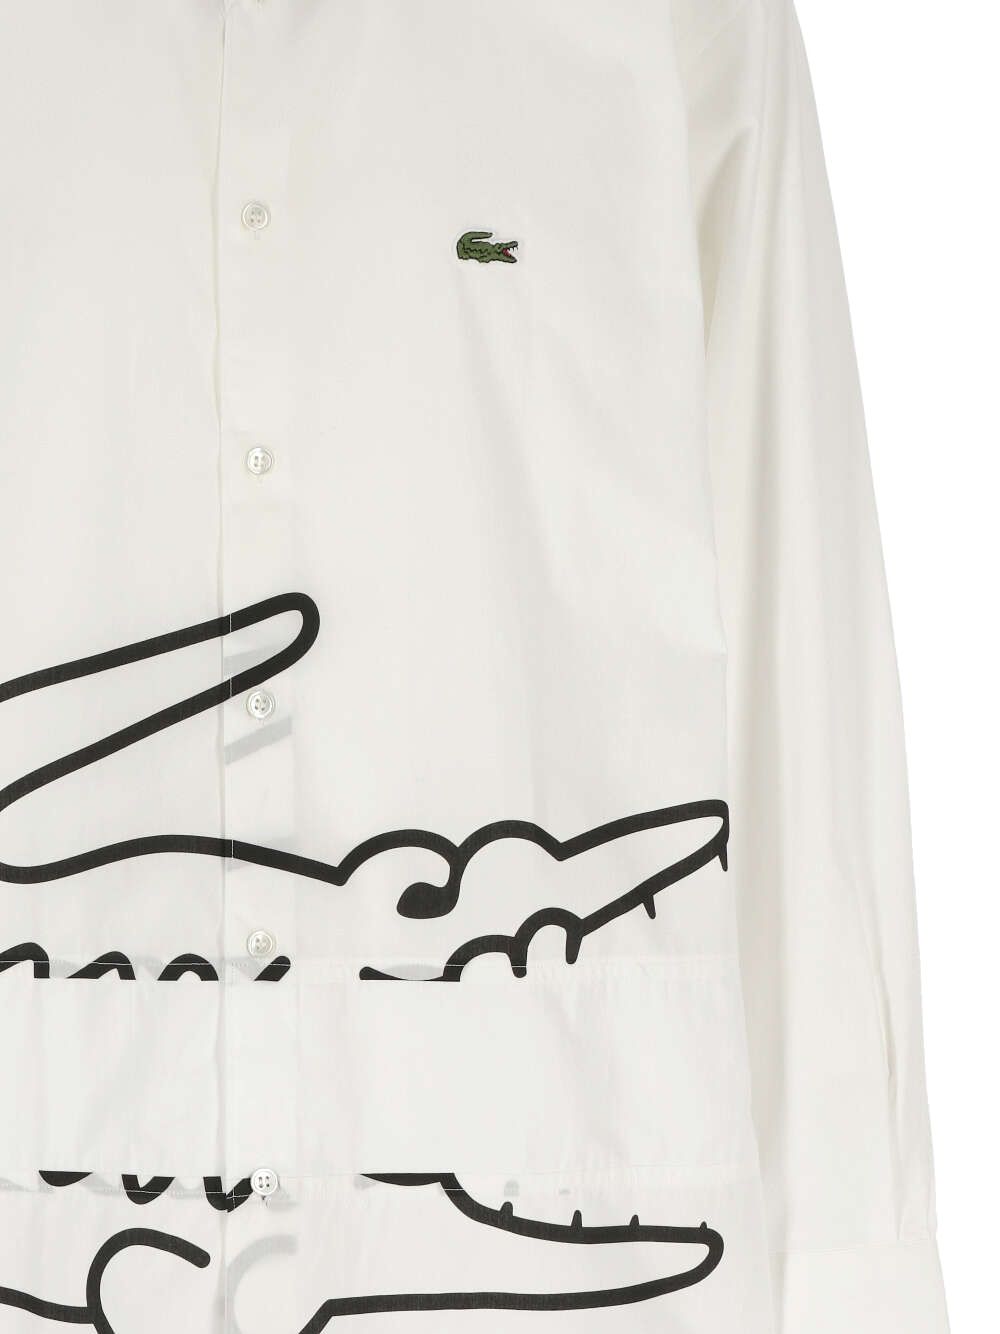 Cotton shirt for Lacoste